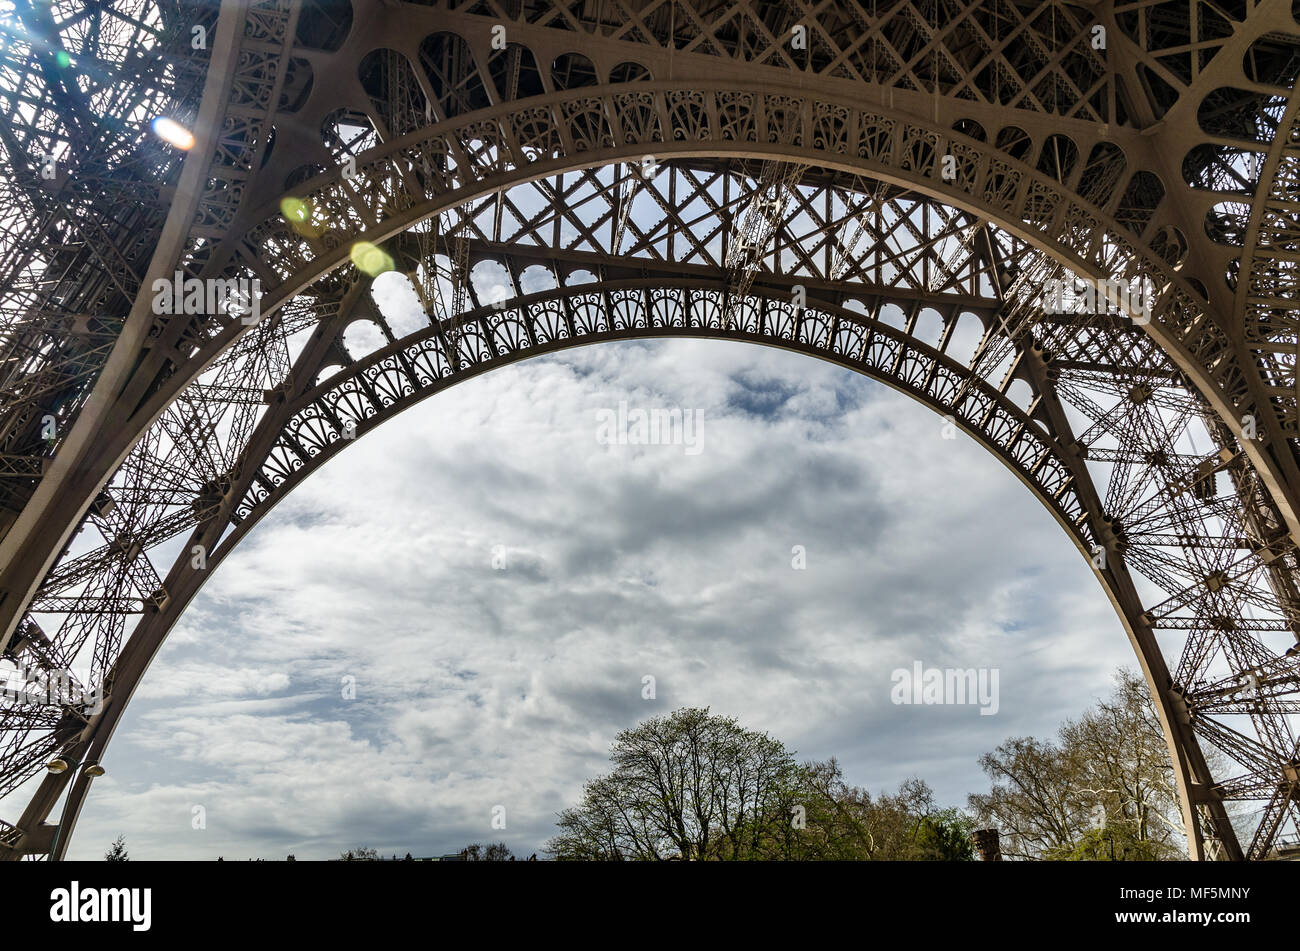 Low angle view of the Eiffel Tower in Paris, France Stock Photo